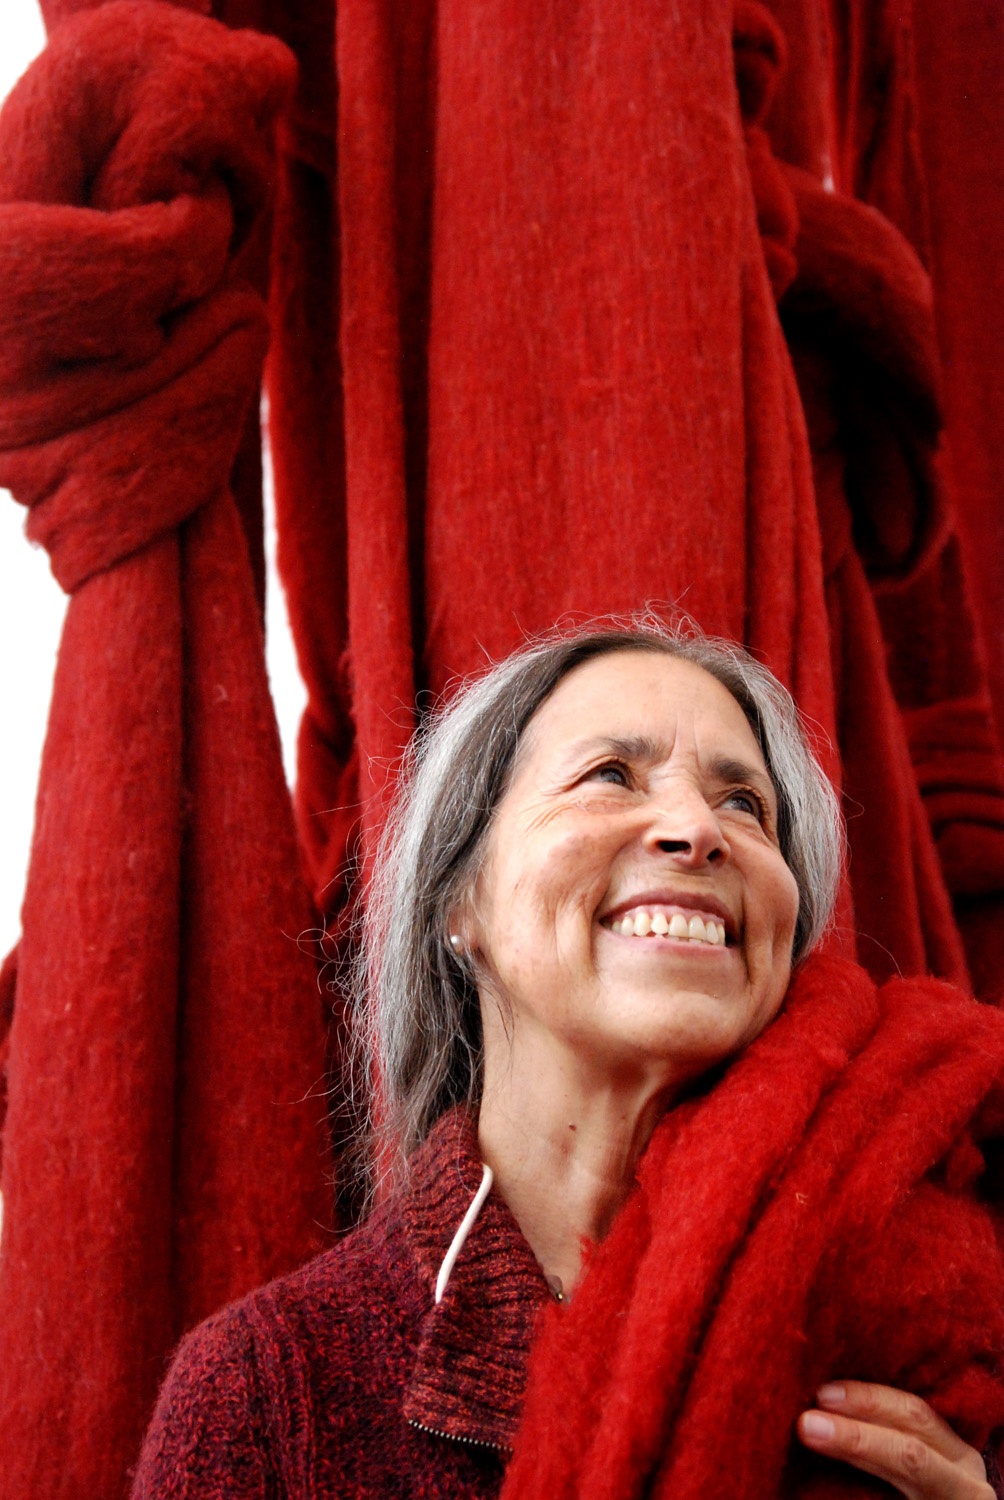 Poet, activist, and artist Cecilia Vicuna looks upward with a thick skein of bright red wool draped over her shoulder. She smiles and has long gray hair pulled back loosely behind her head. Behind her broad swaths of the red fabric hang from above. One of these swaths has a large knot tied in it.